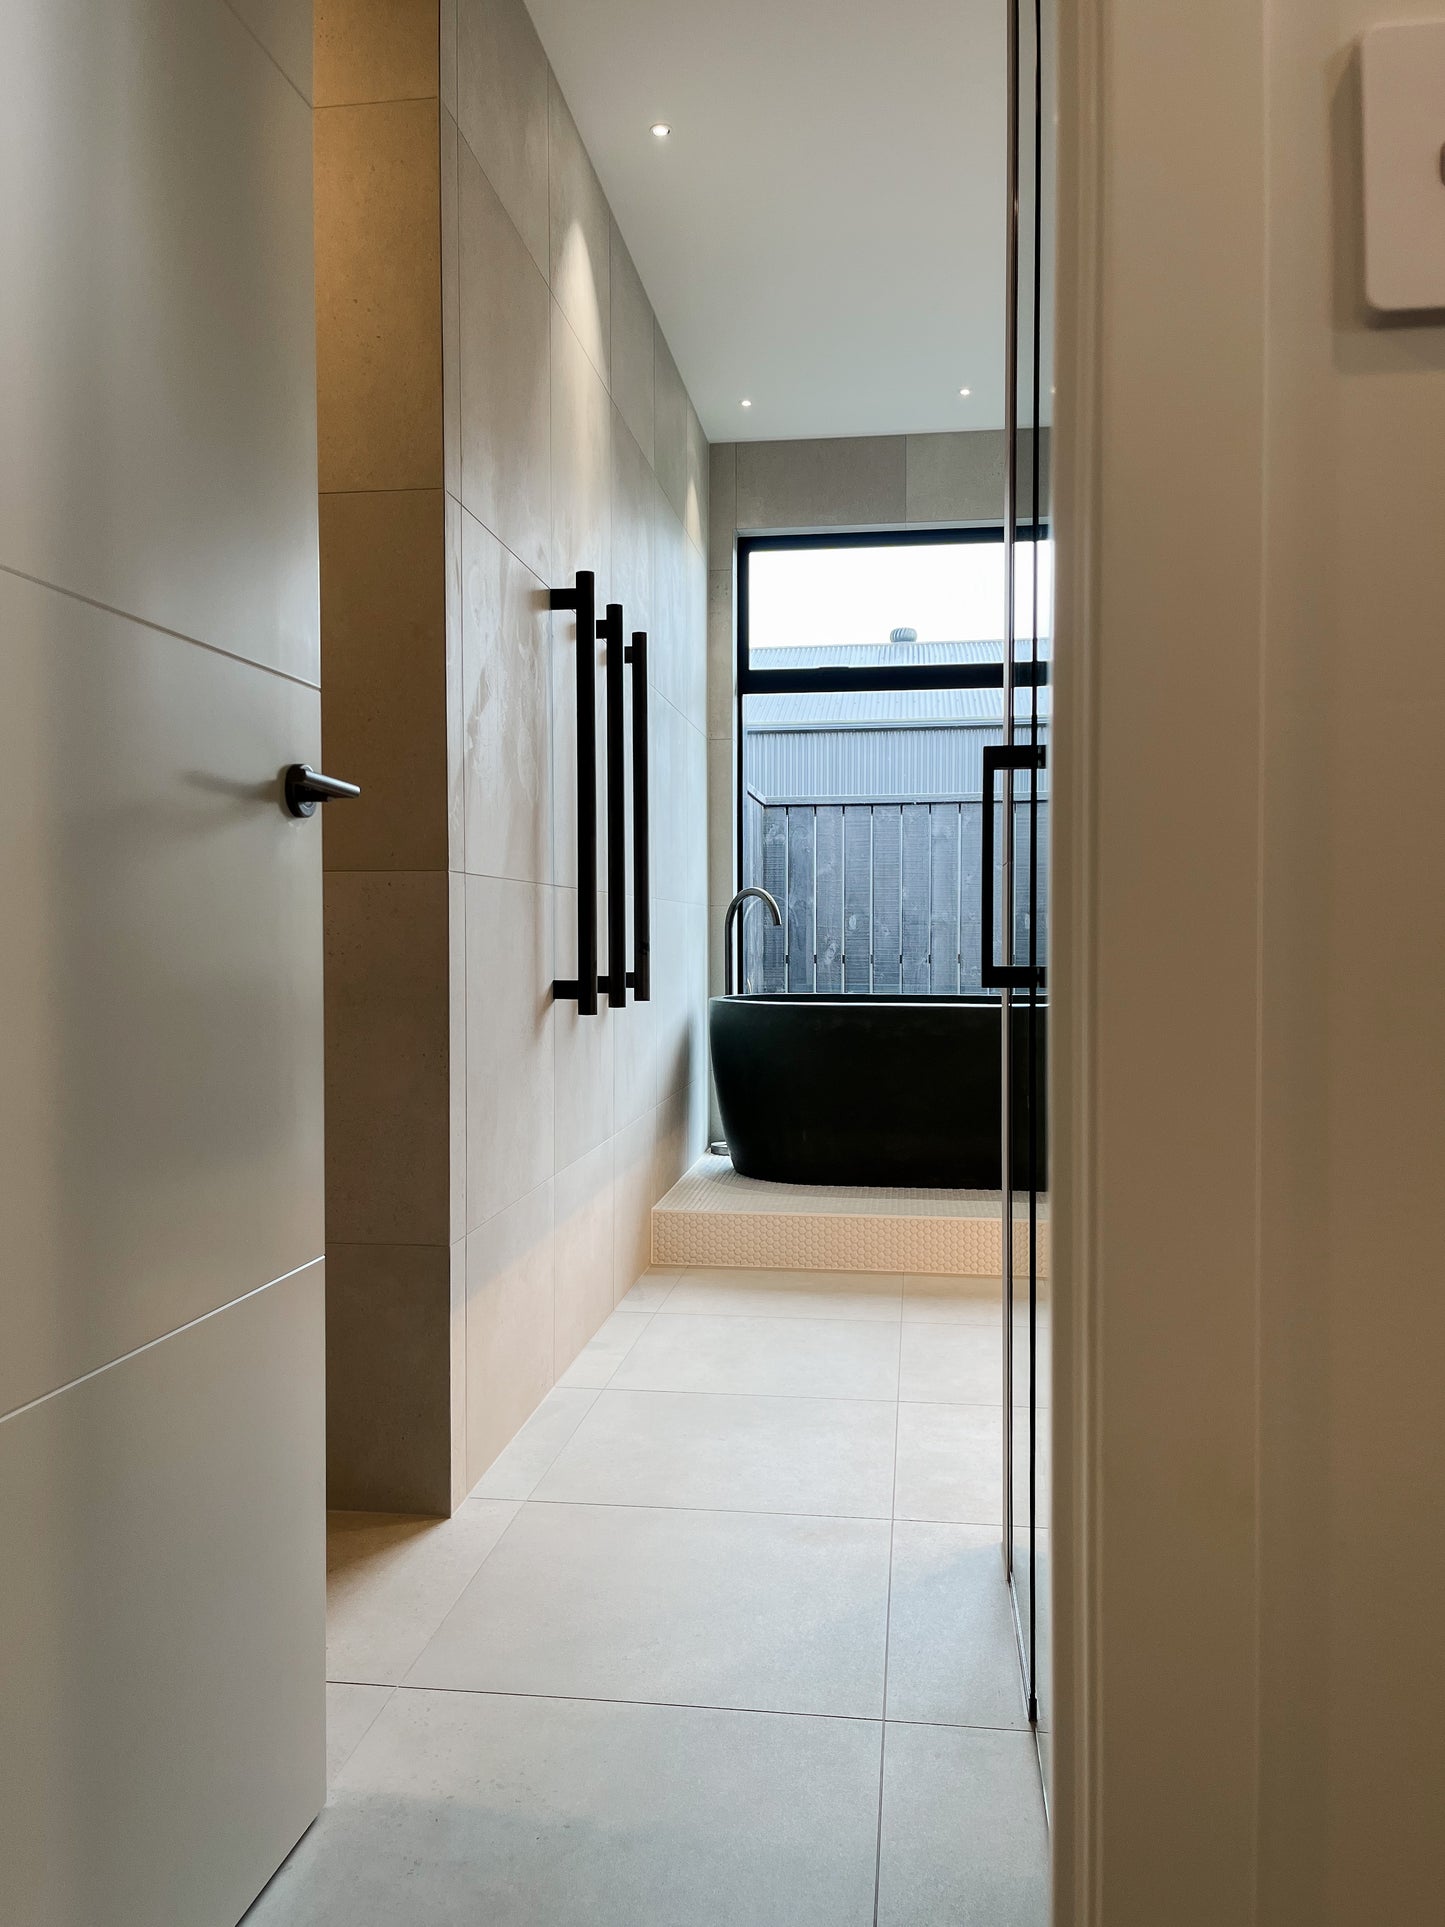 Modern, expansive bathroom designed by Interior Designer Lucy Furniss featuring negative toe kick and large joinery